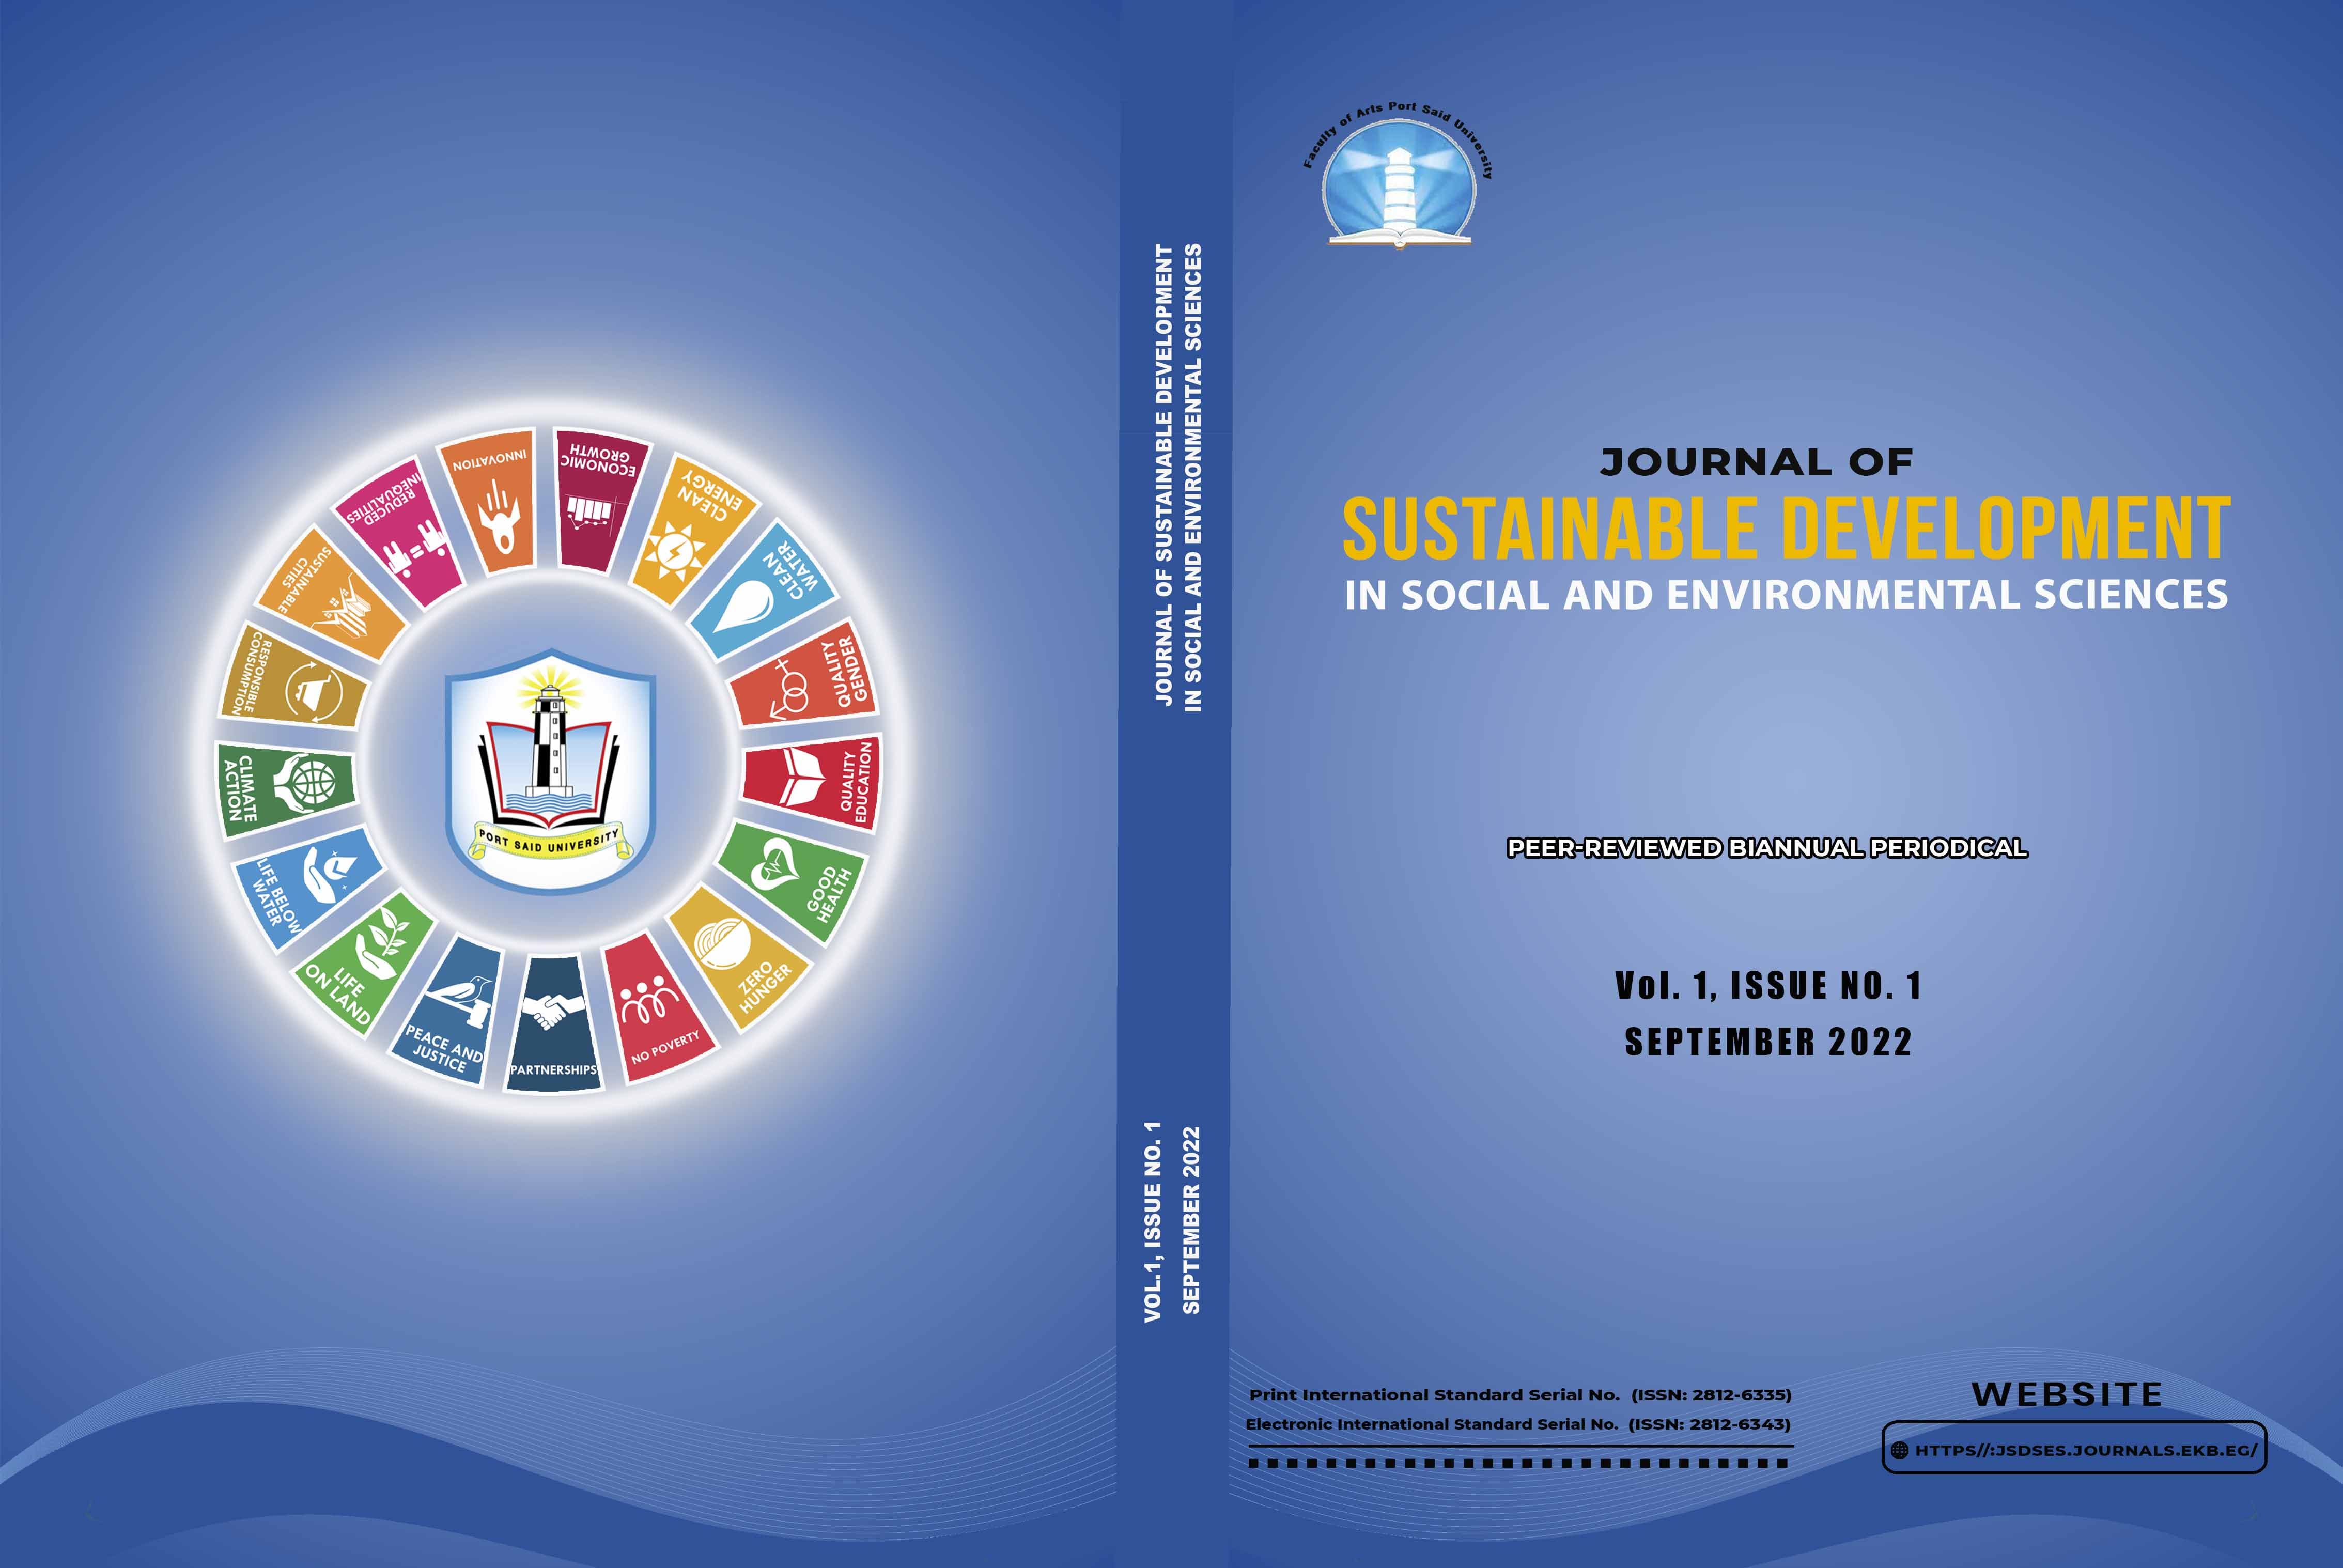 Journal of Sustainable Development in Social and Environmental Sciences